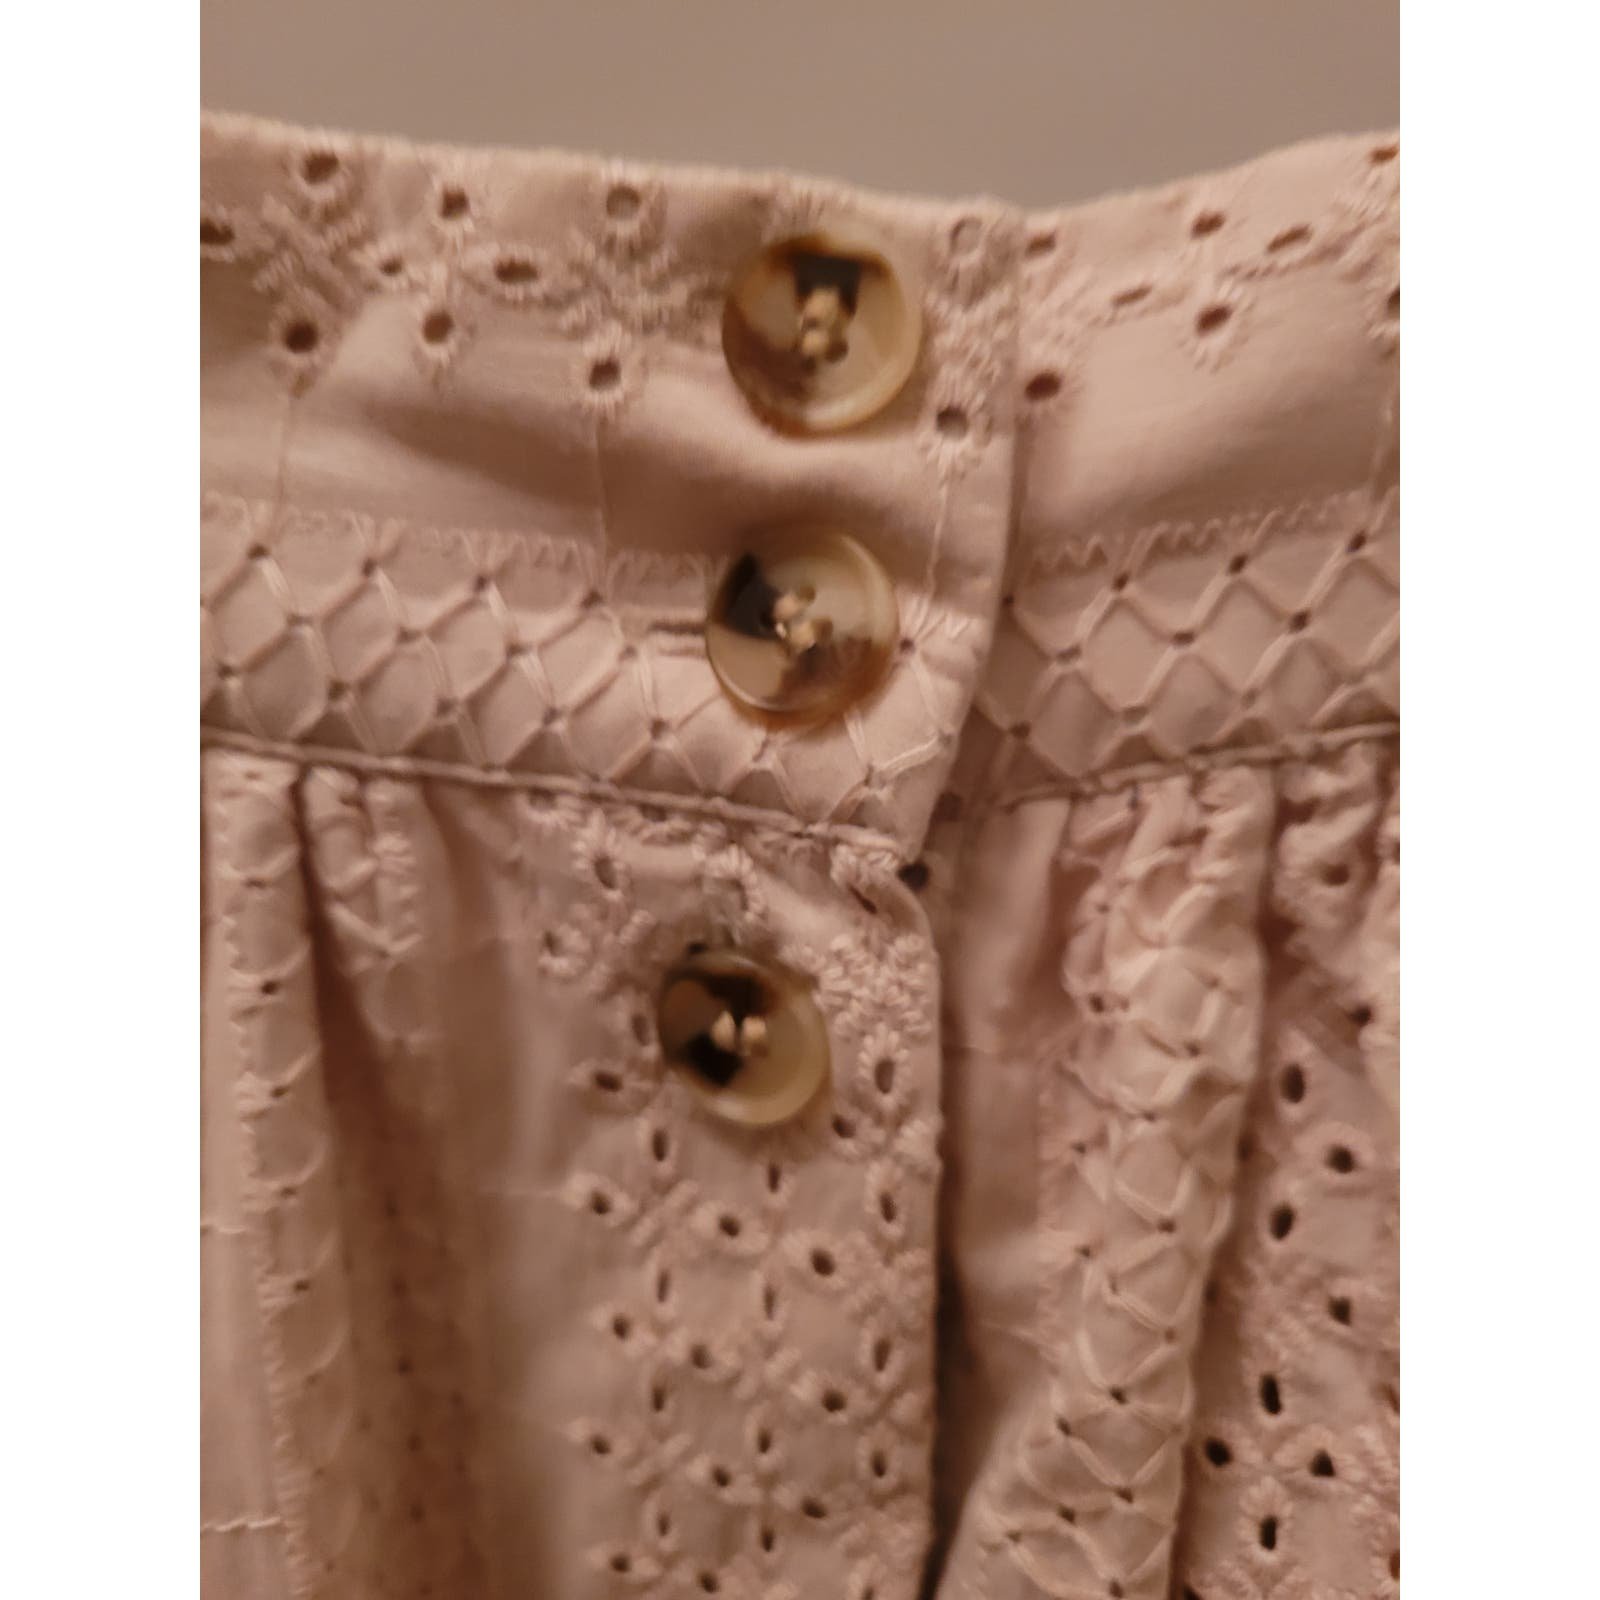 Buy H&M Bohemian Embroidered Eyelet Button Front Cotton Midi Skirt Beige Sz 18 jAG2gfY3X hot sale